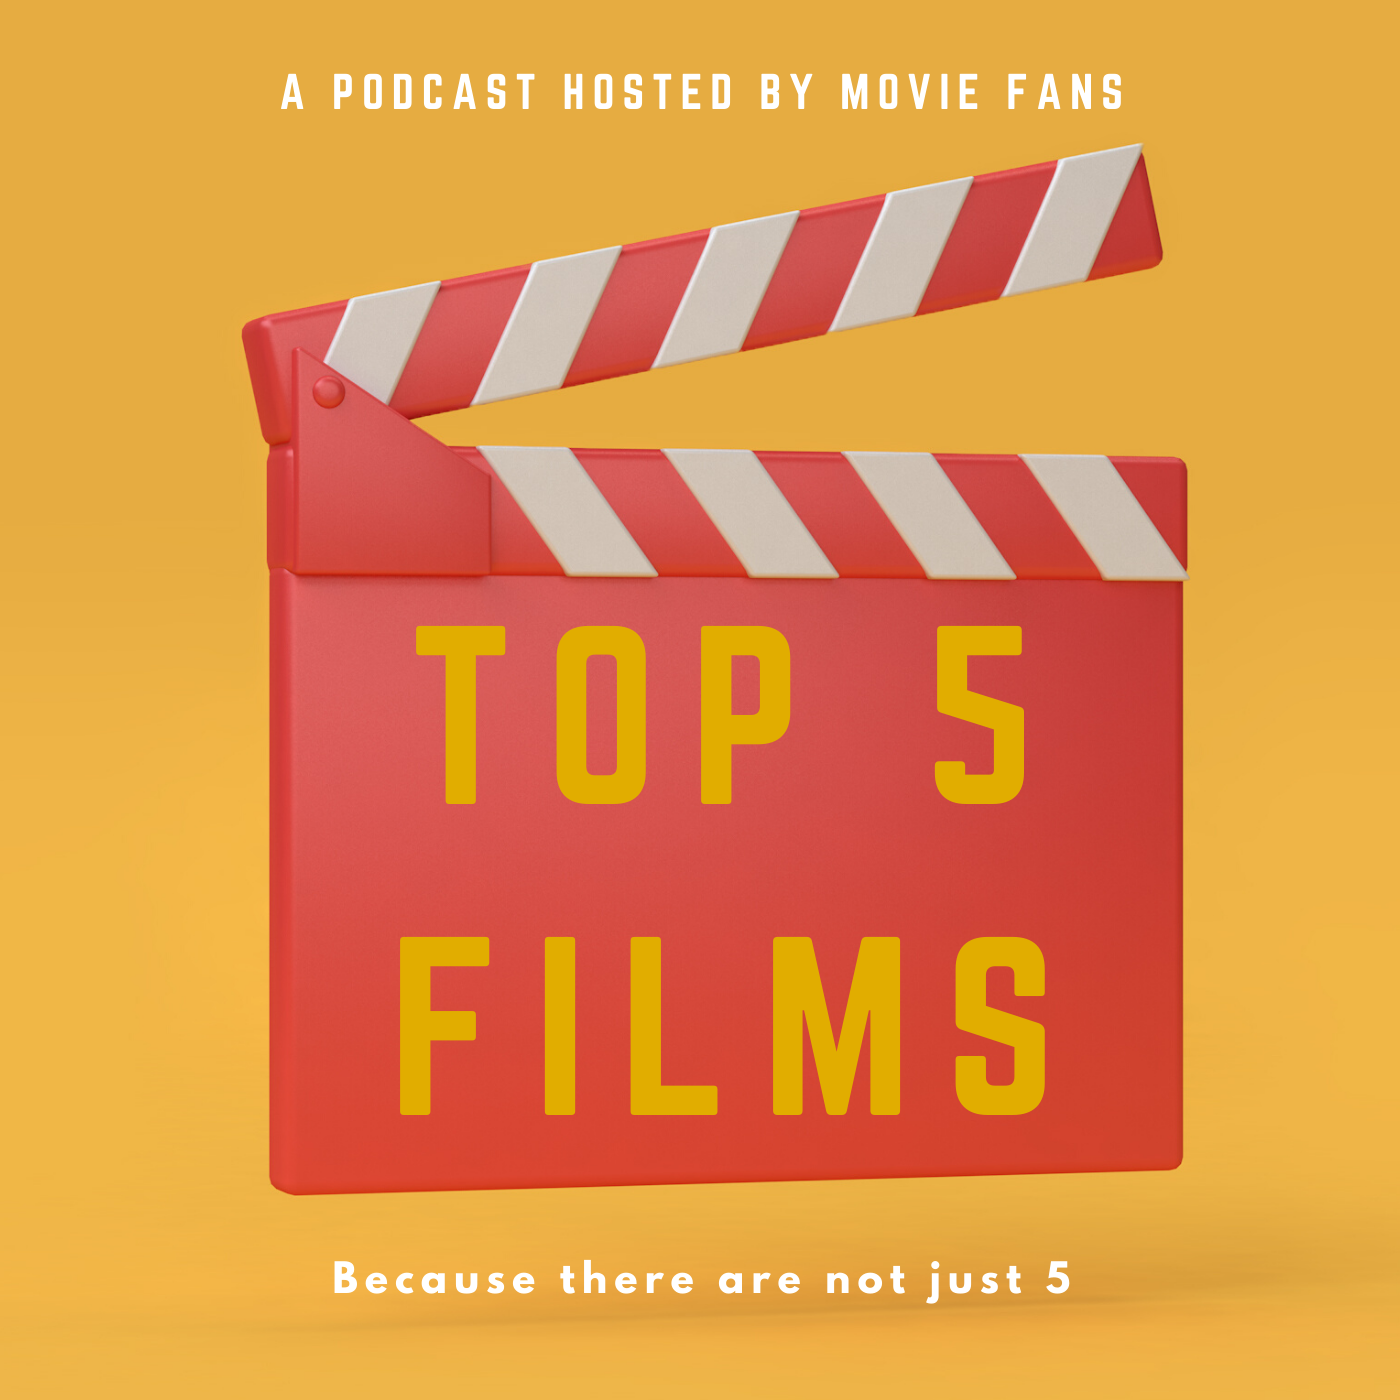 The Top 5 films' Podcast